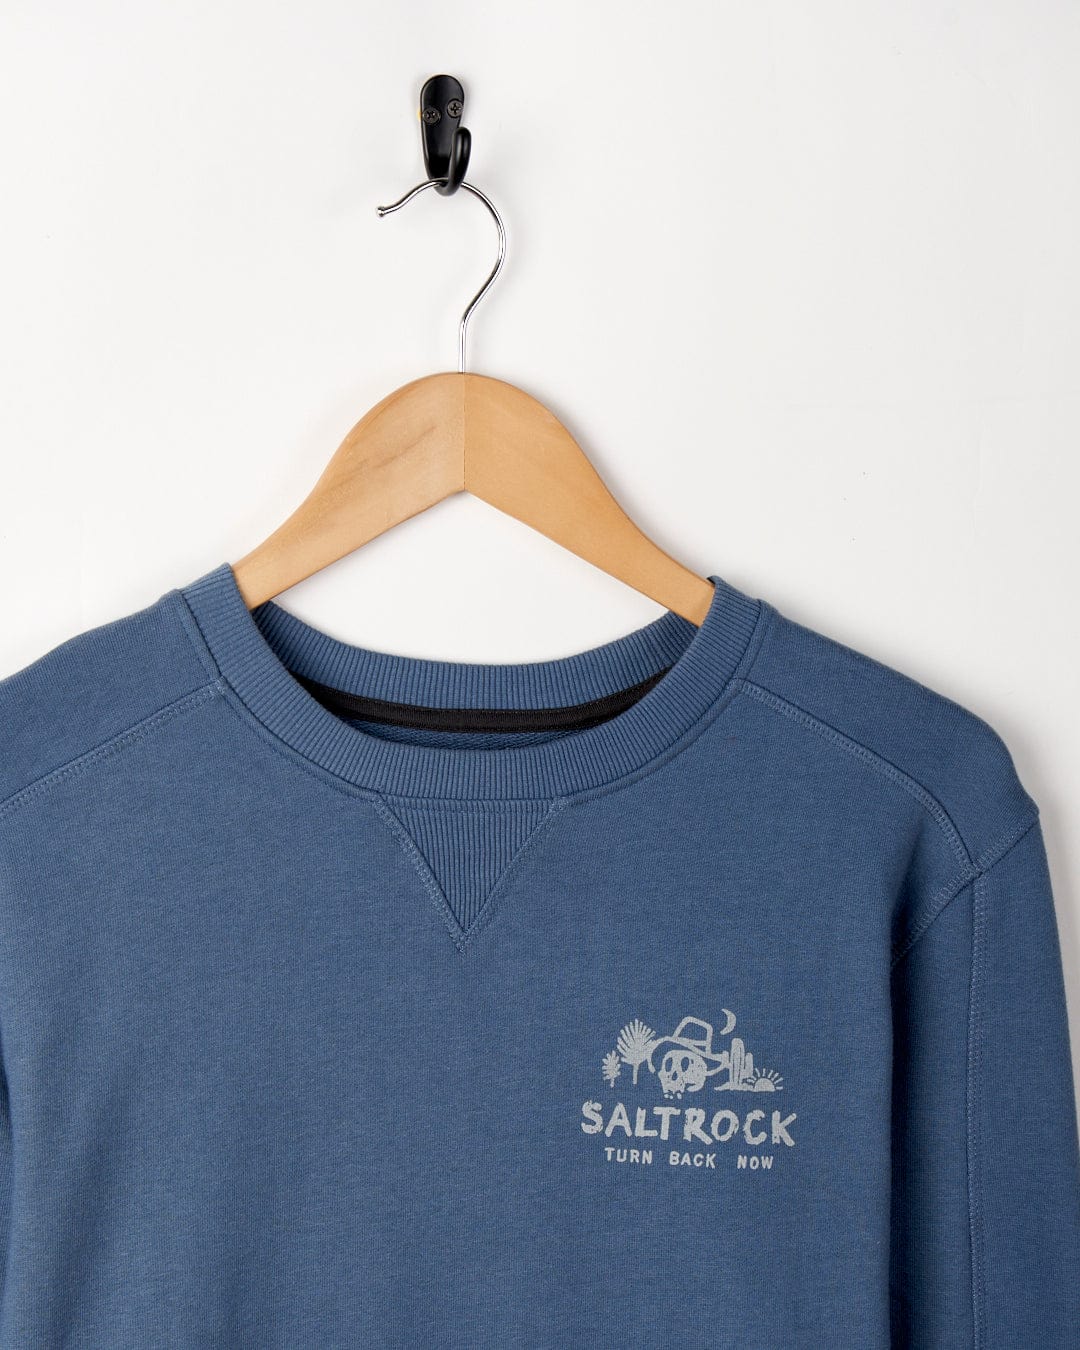 A Last Stop Motel - Recycled Mens Sweatshirt - Blue sweatshirt with a crew neckline hangs on a wooden hanger against a plain white background.